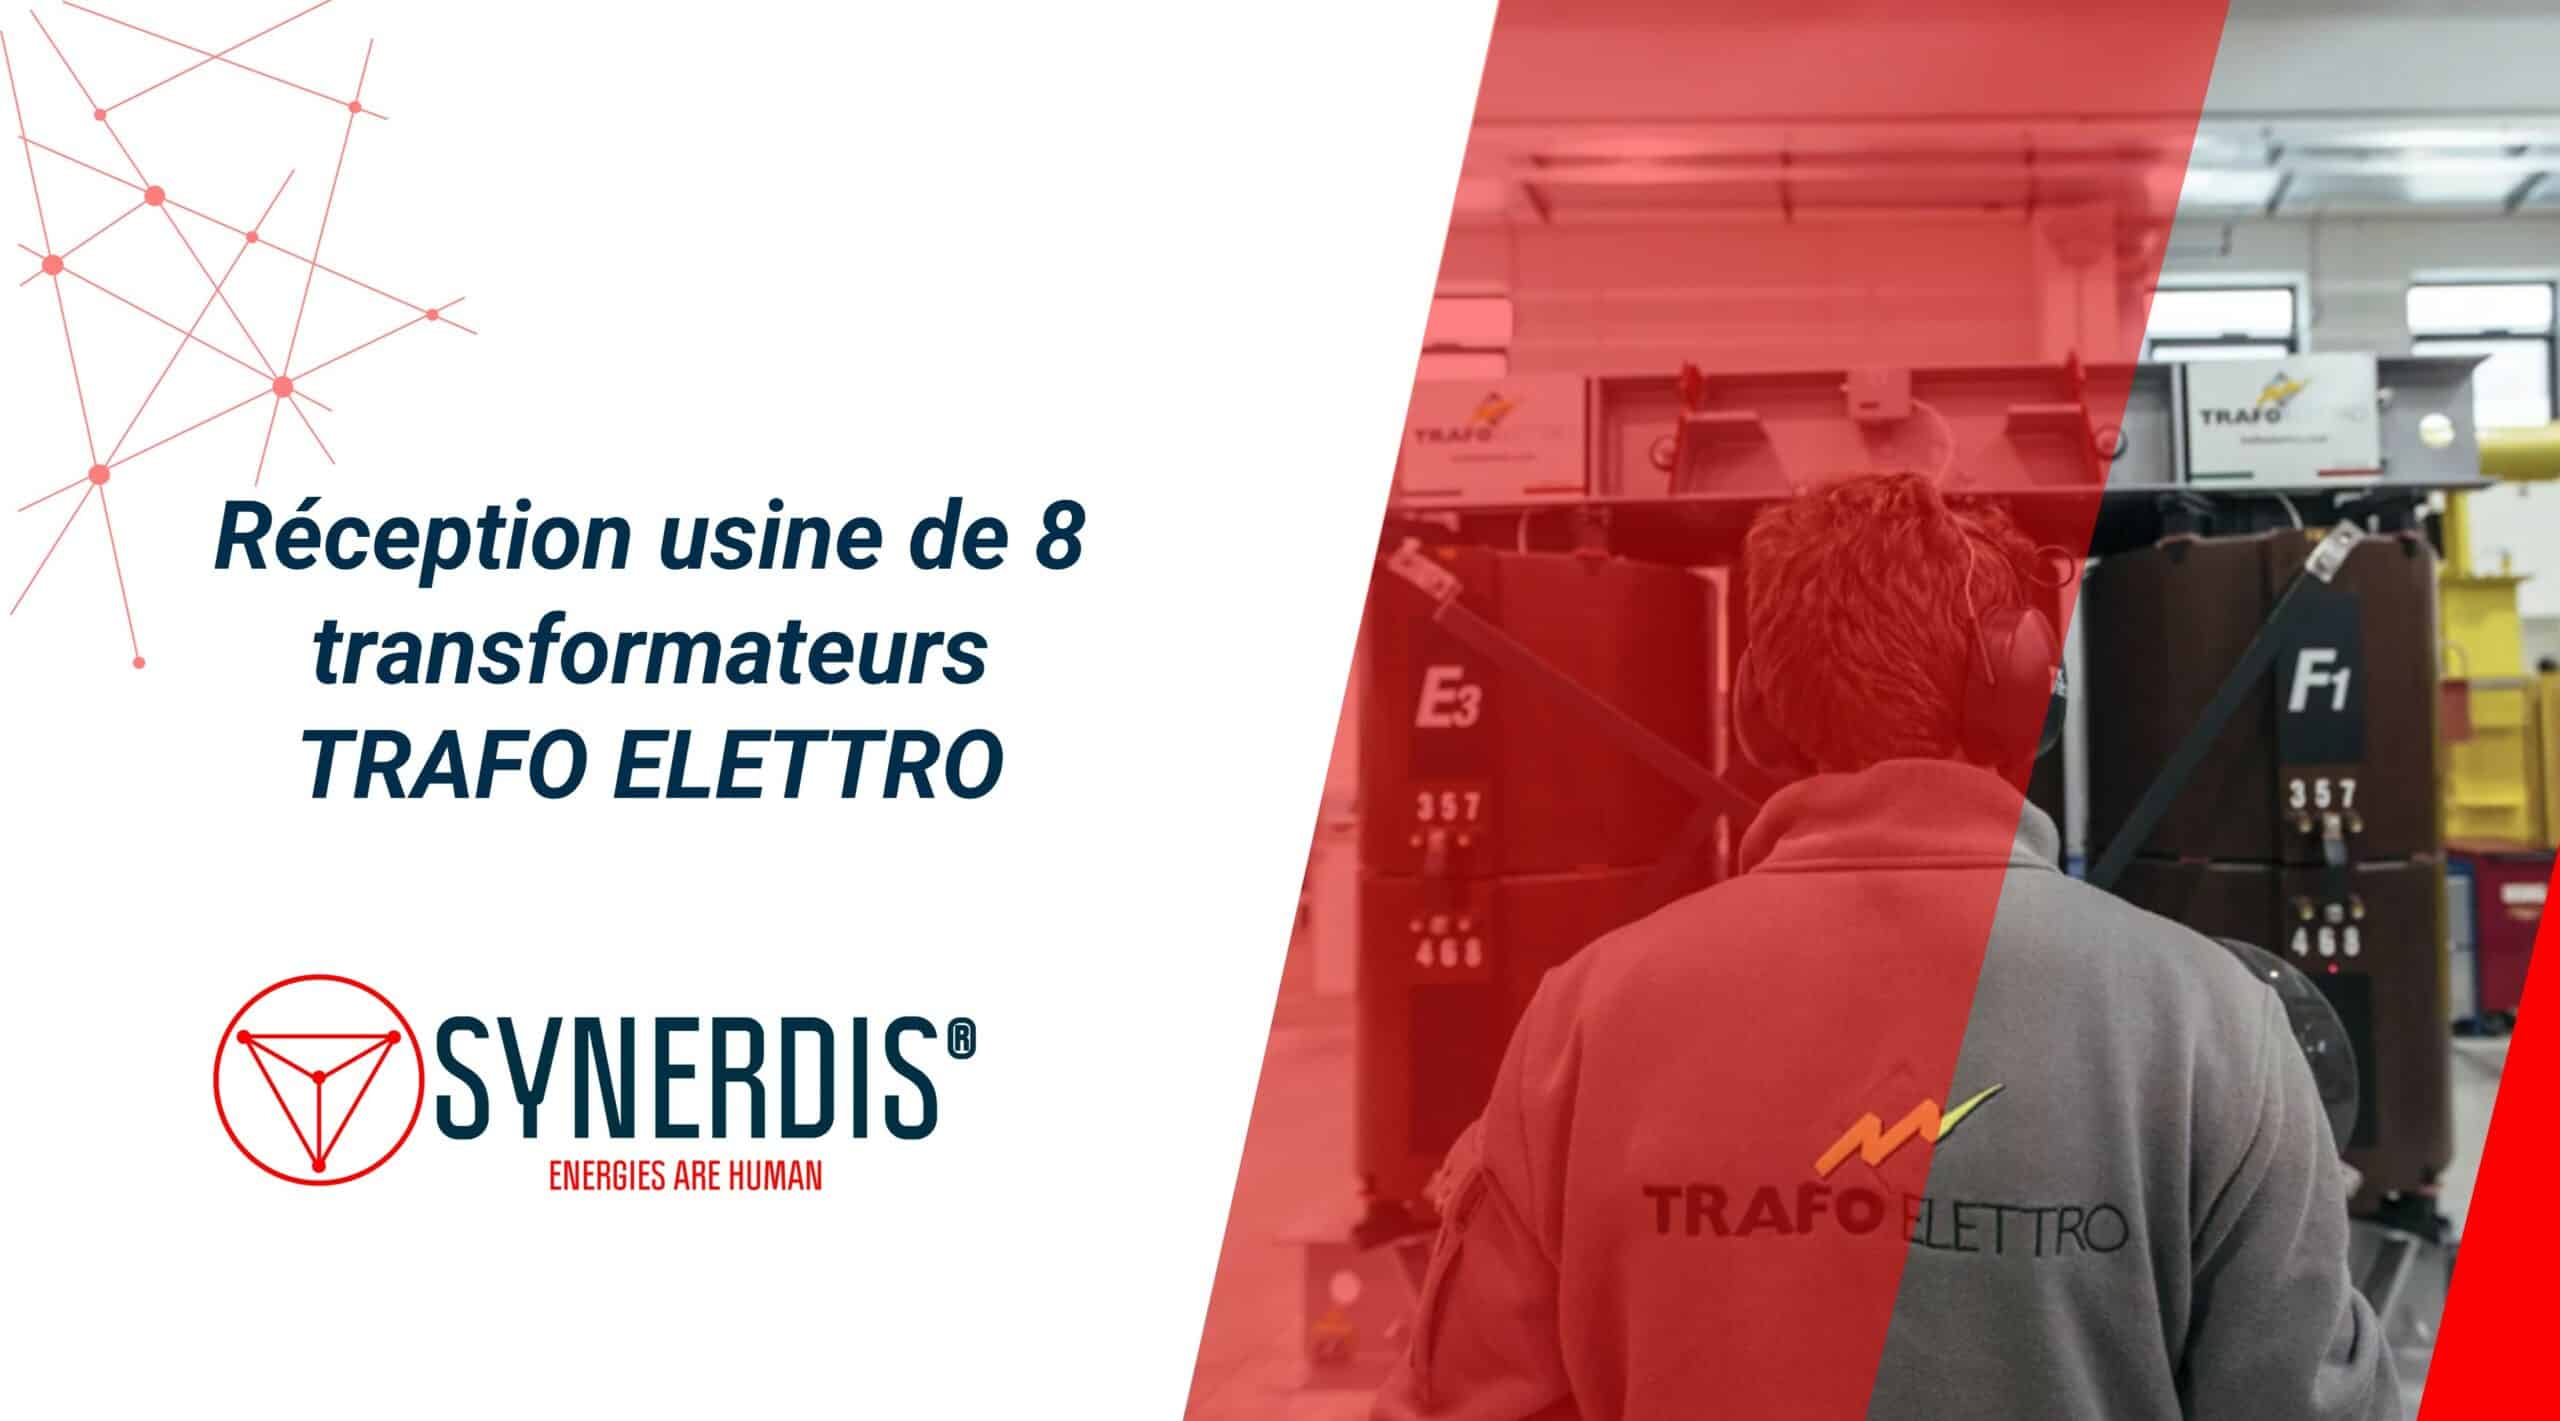 Our TrafoELETTRO coated dry-type transformers are reputed to be among the most reliable on the market, with an extremely low MTBF (Mean Time Between Failures).